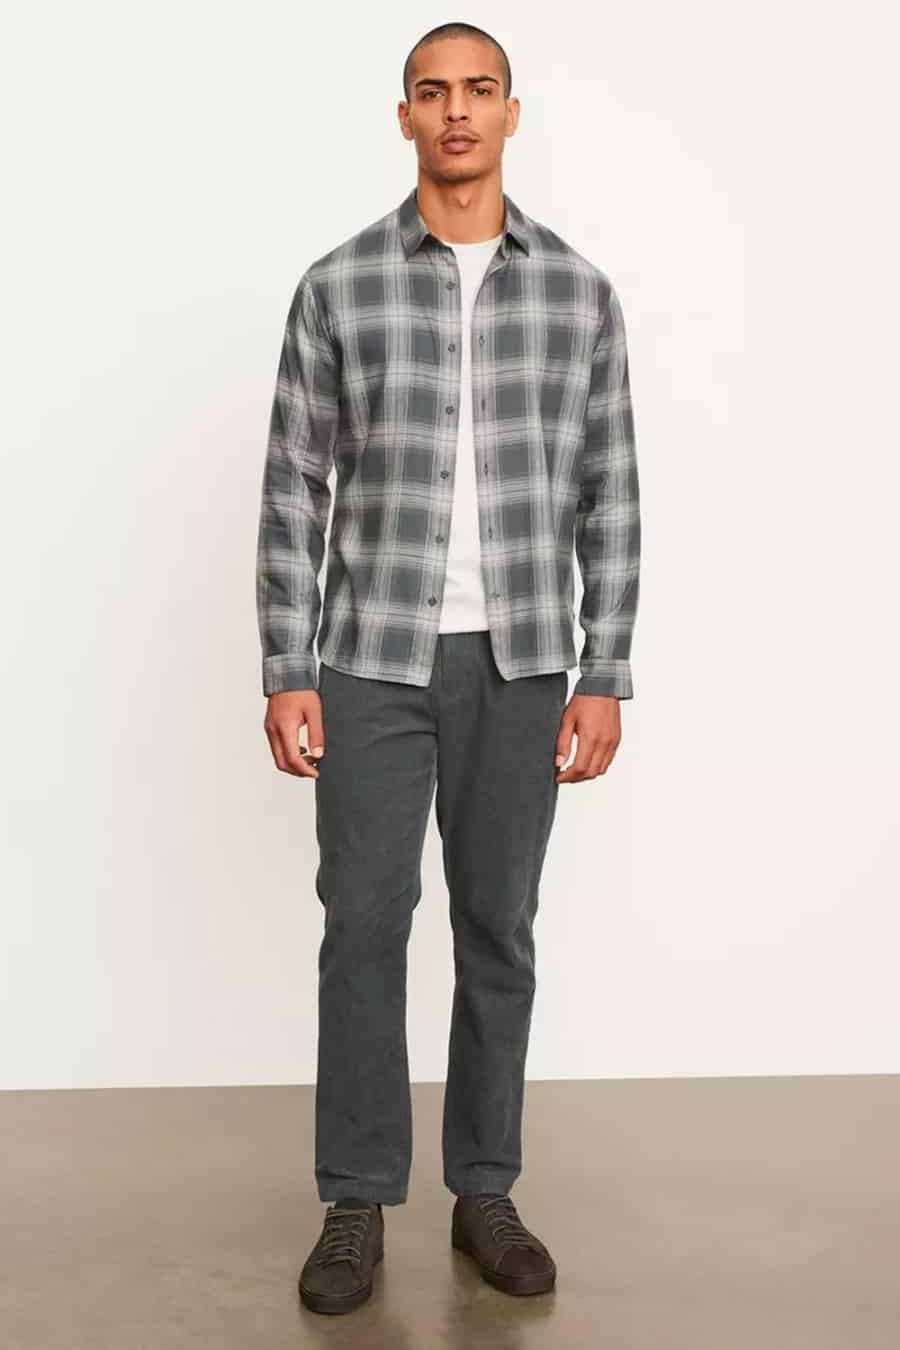 Men's straight fit grey chinos, white T-shirt and checked grey flannel shirt outfit